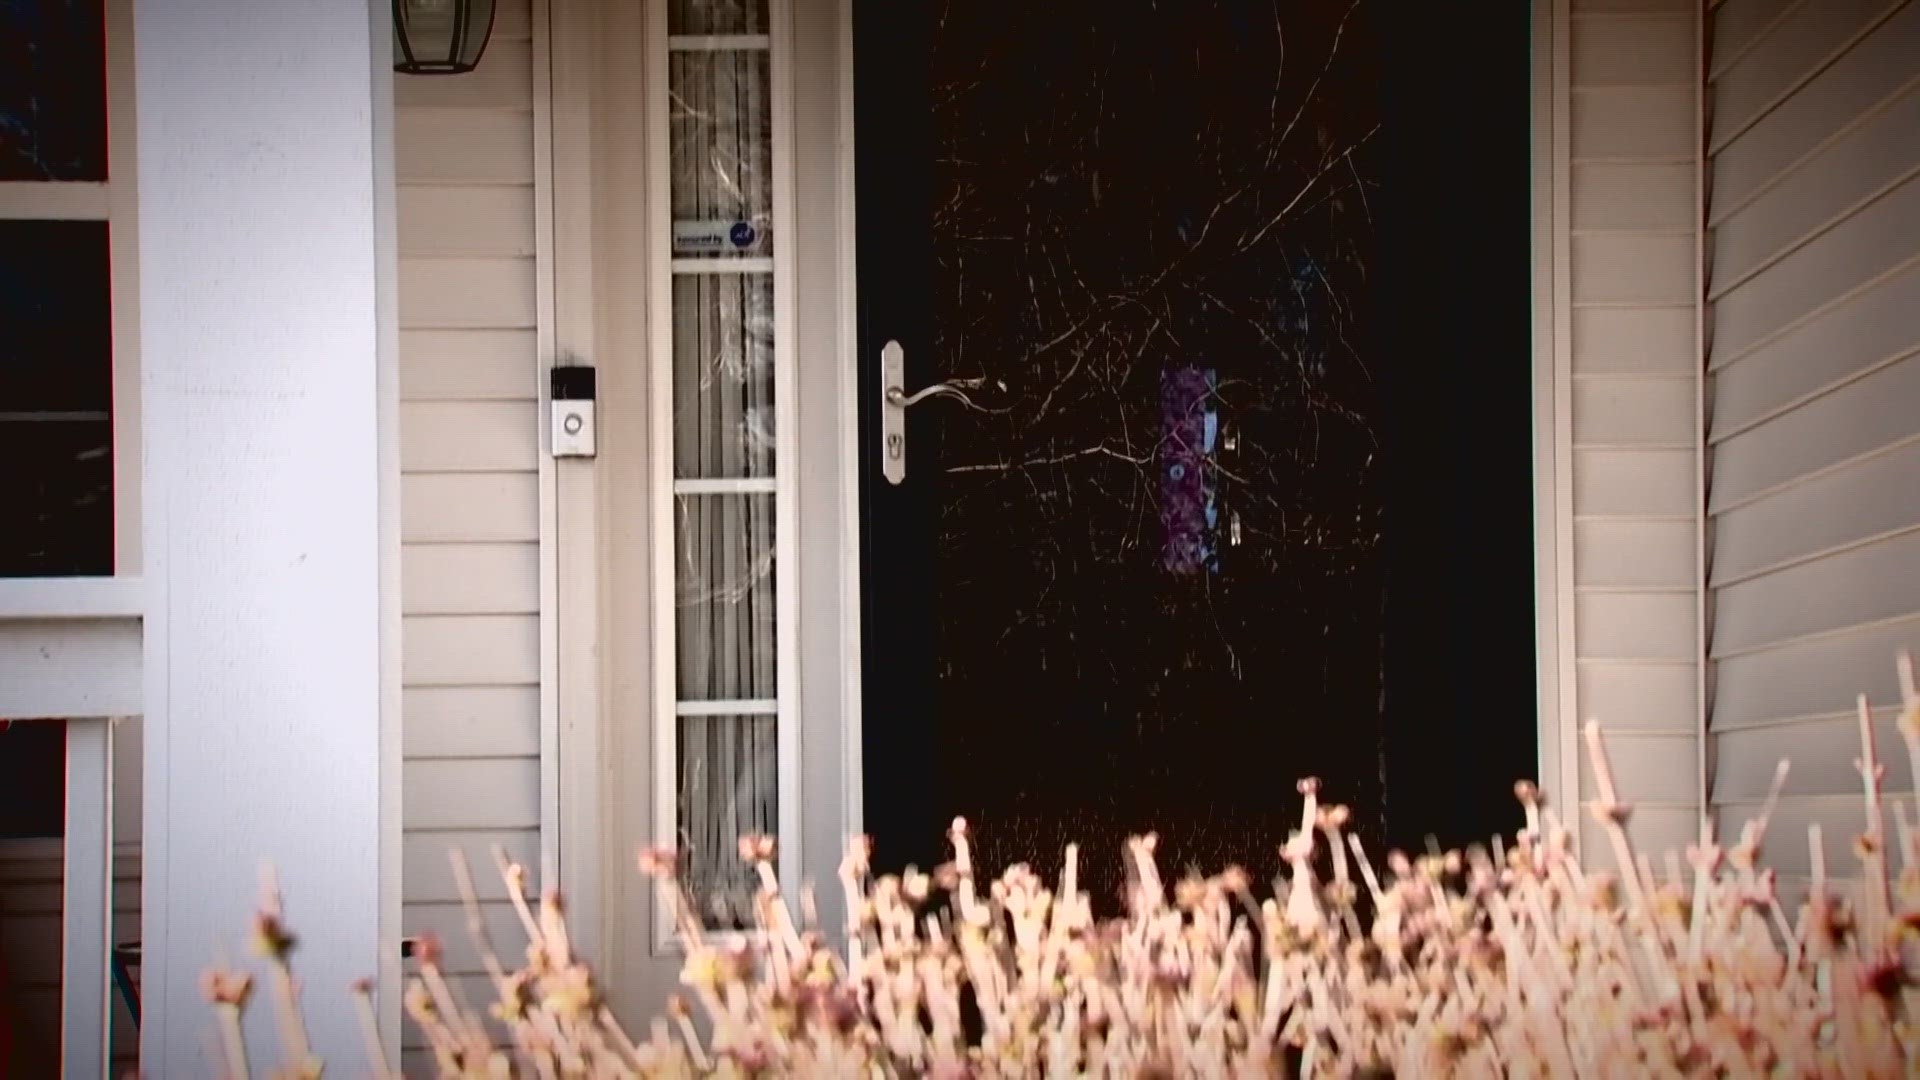 Police say there are a few key steps that are often overlooked but can help prevent a home burglary.